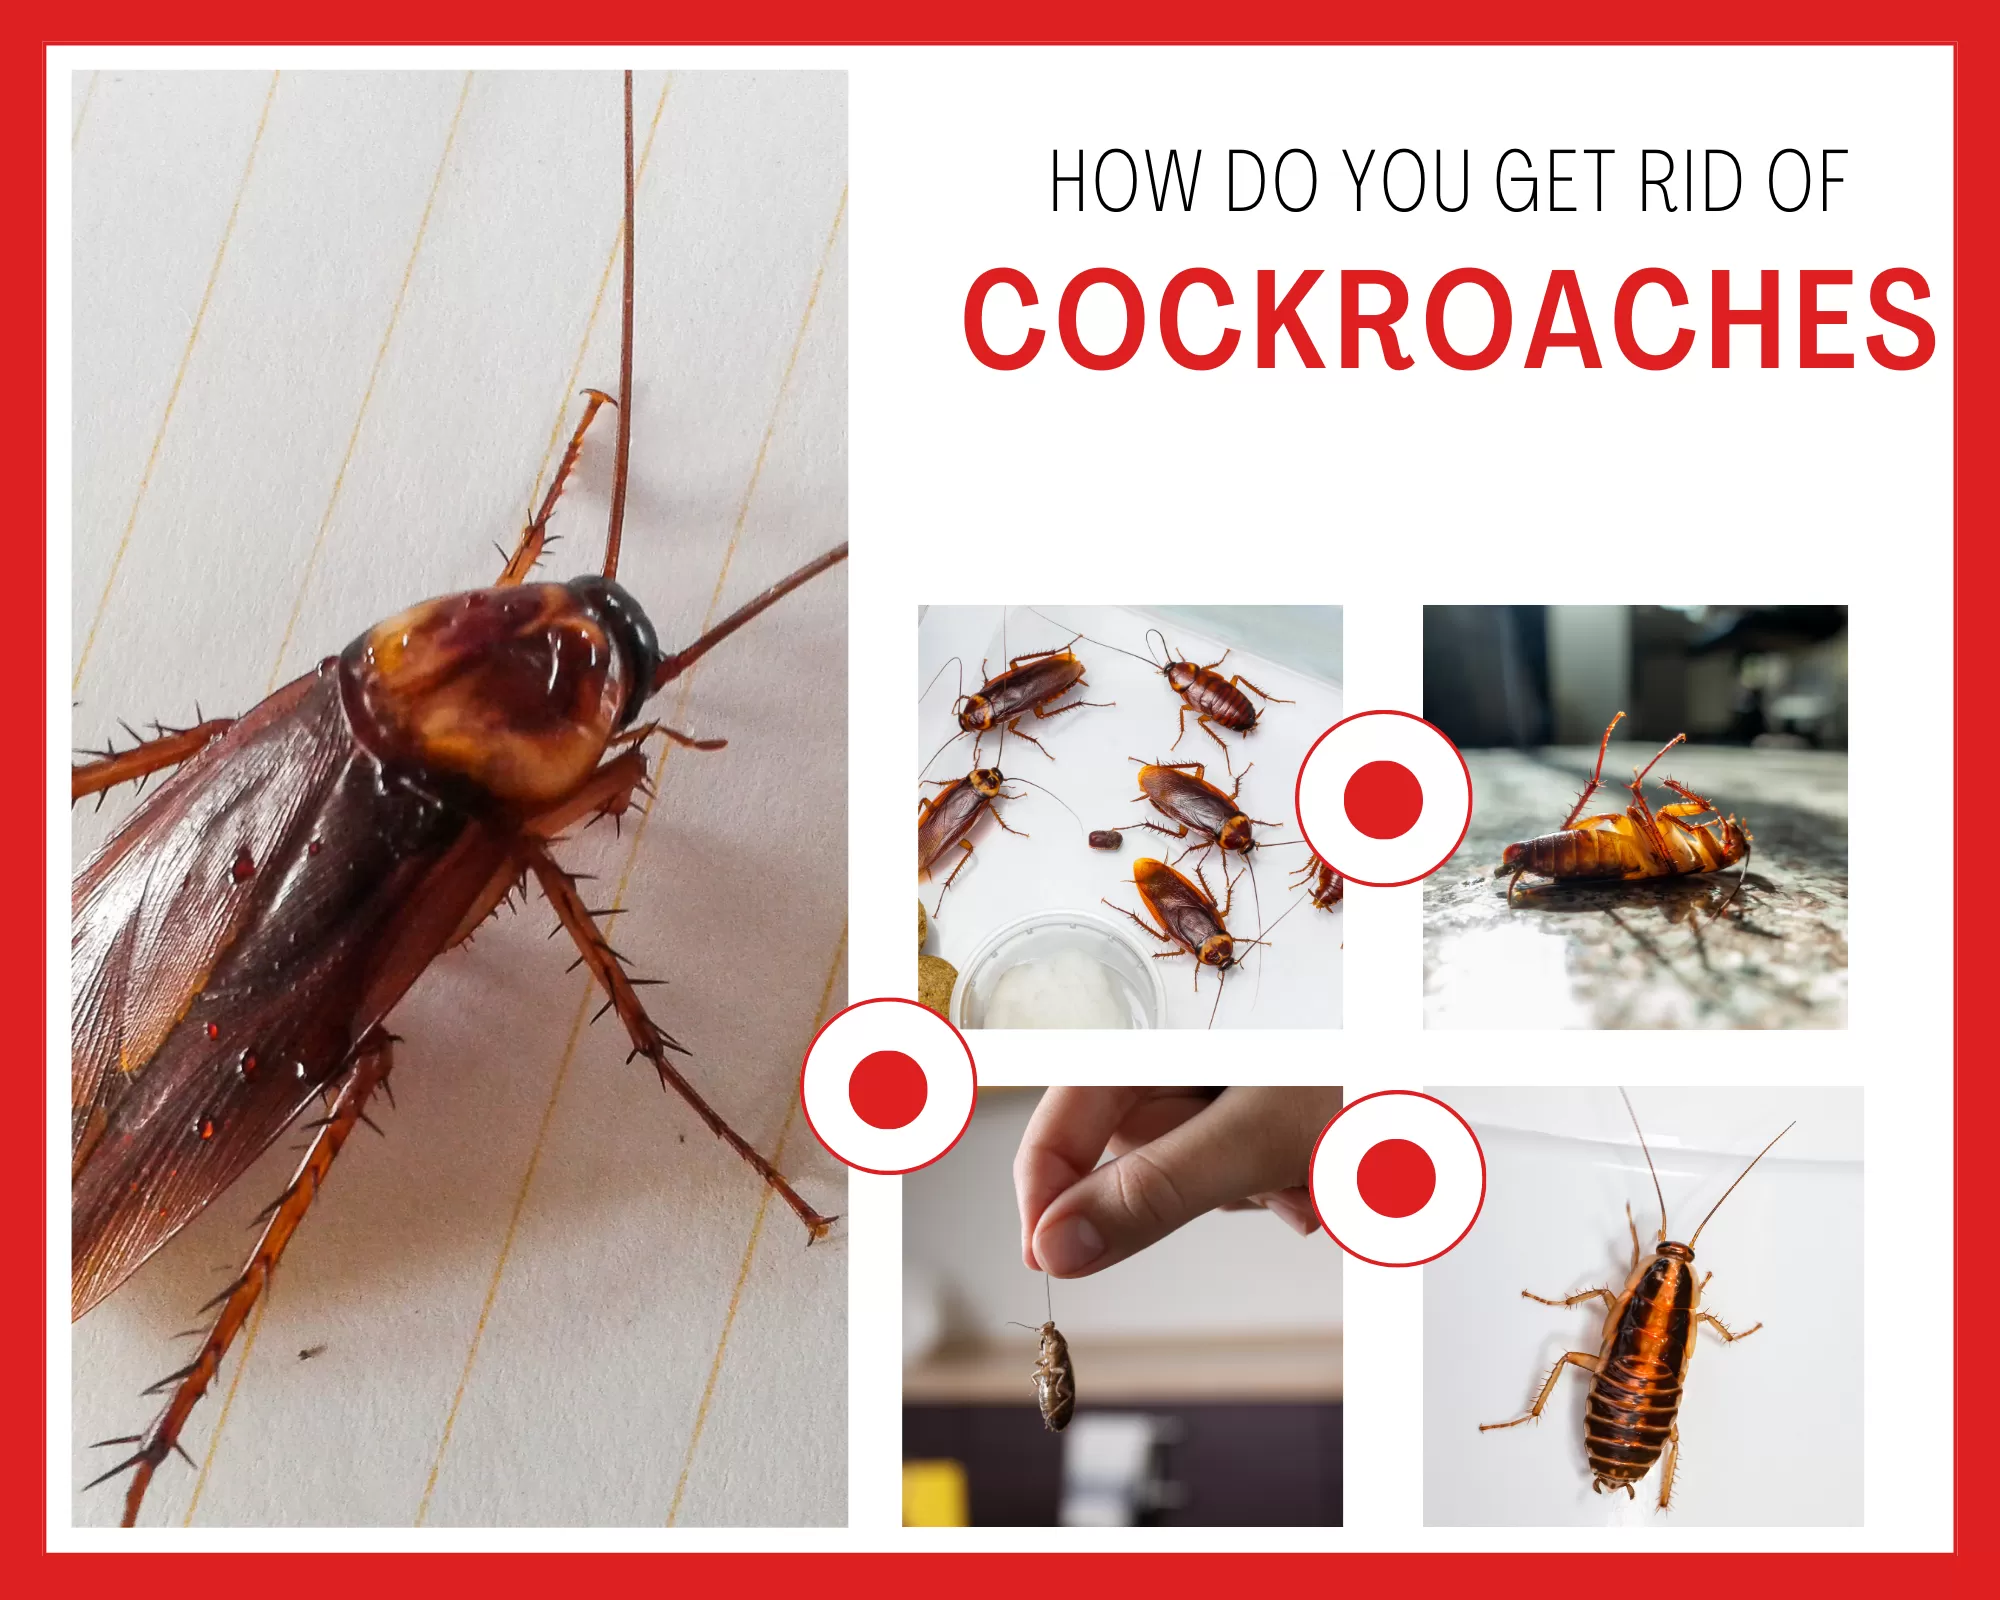 "Keep your kitchen cockroach-free with our expert tips! Transform your space into a pest-free oasis for a healthier home."